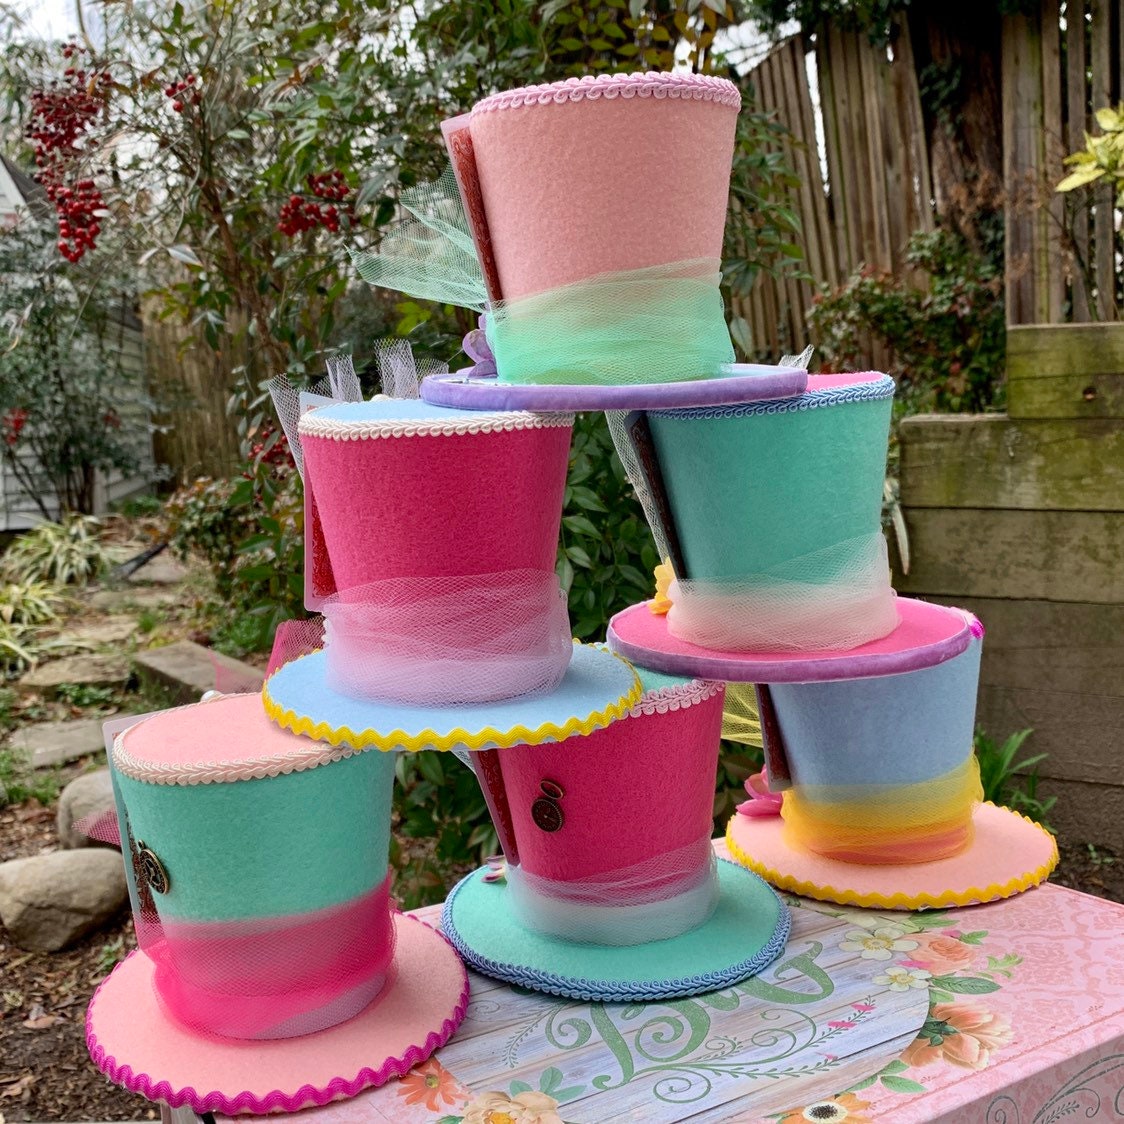 10 Alice in Wonderland Centerpieces, Mad Hatter Tea Party Decorations Felt  Top Hats 4.5 Tall Onederland Birthday Baby Bridal Shower -  Norway